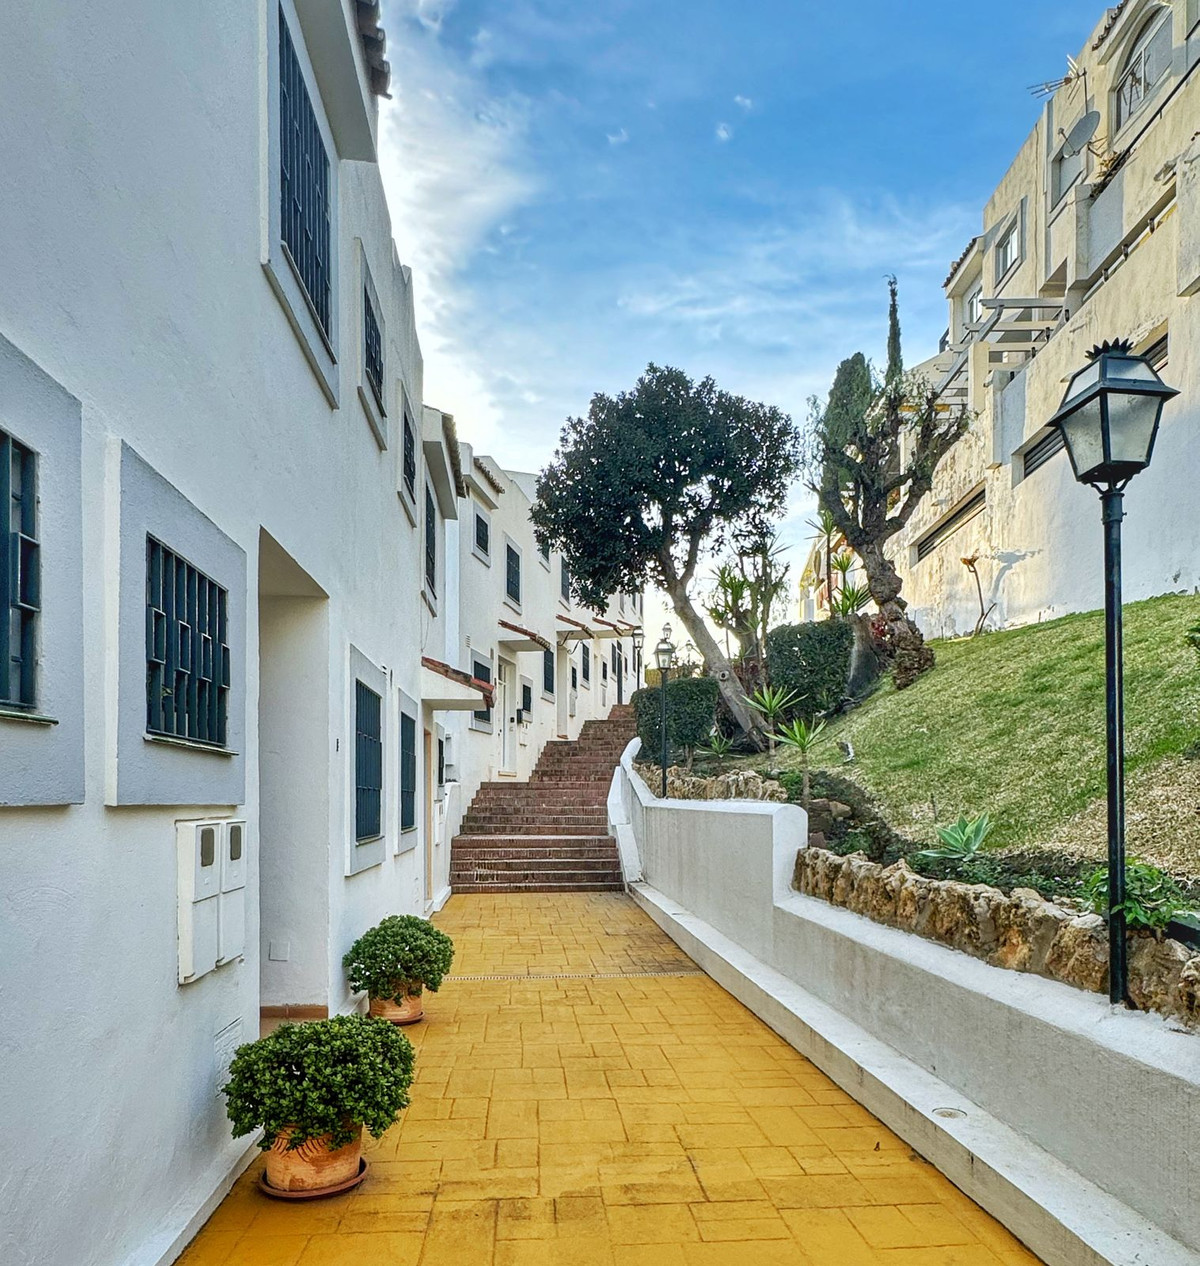 3 bedroom townhouse for sale nueva andalucia